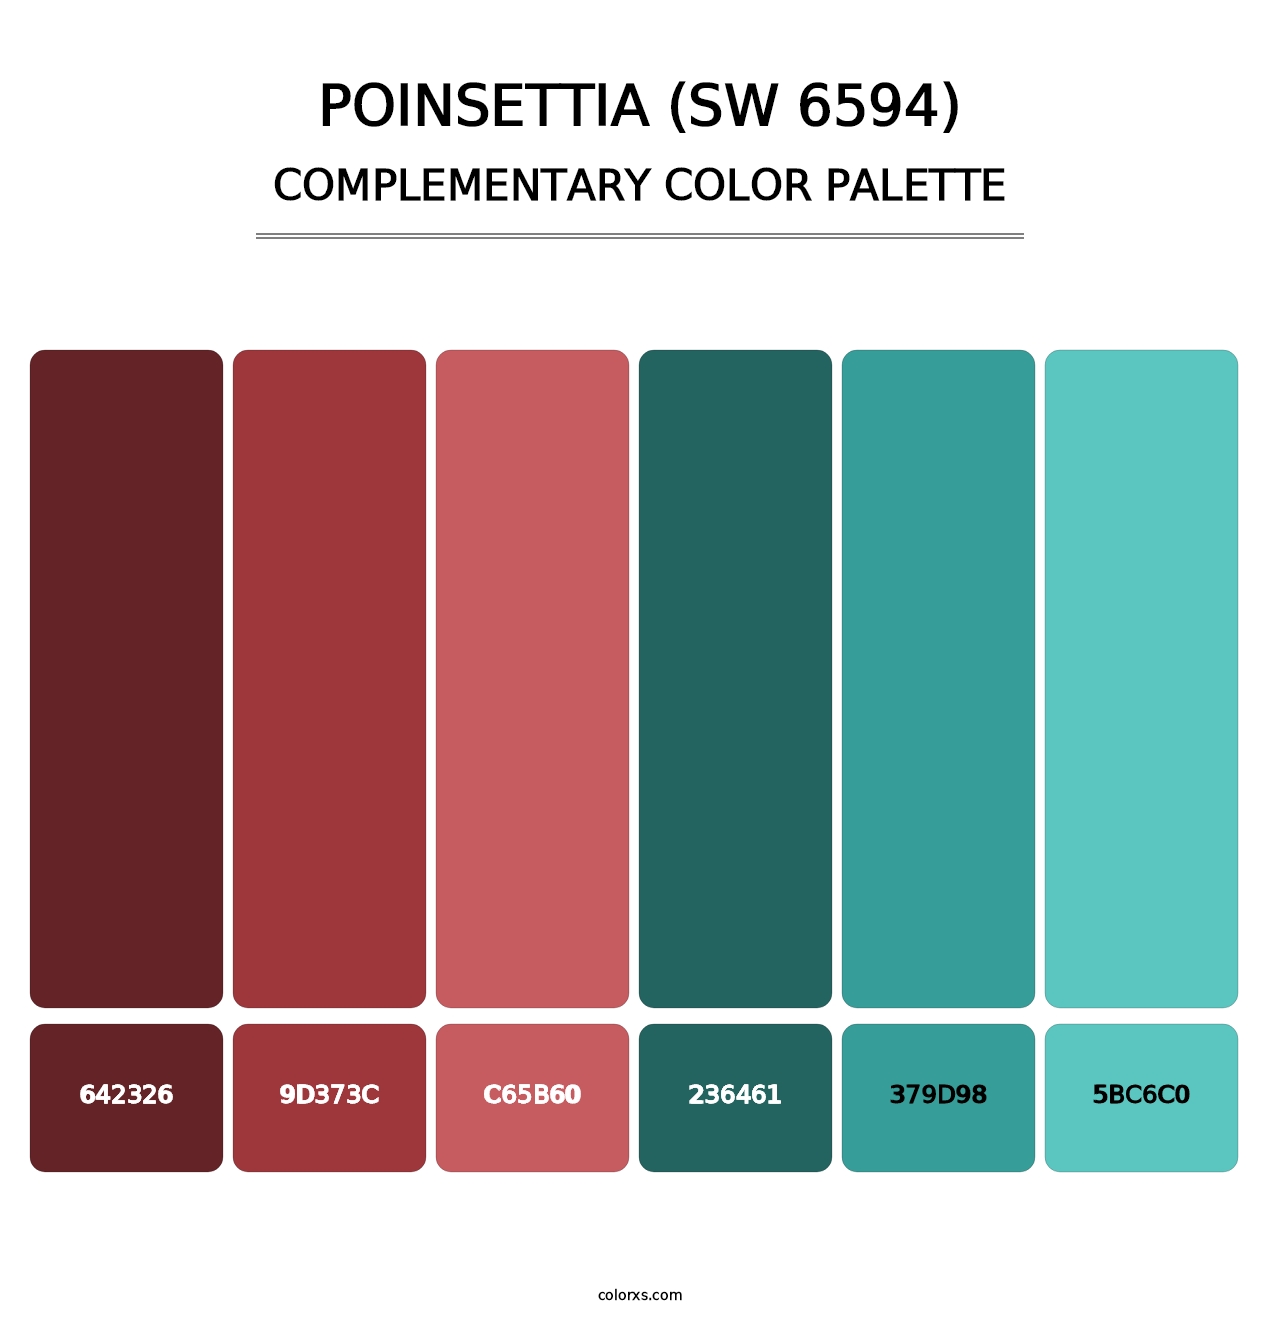 Poinsettia (SW 6594) - Complementary Color Palette